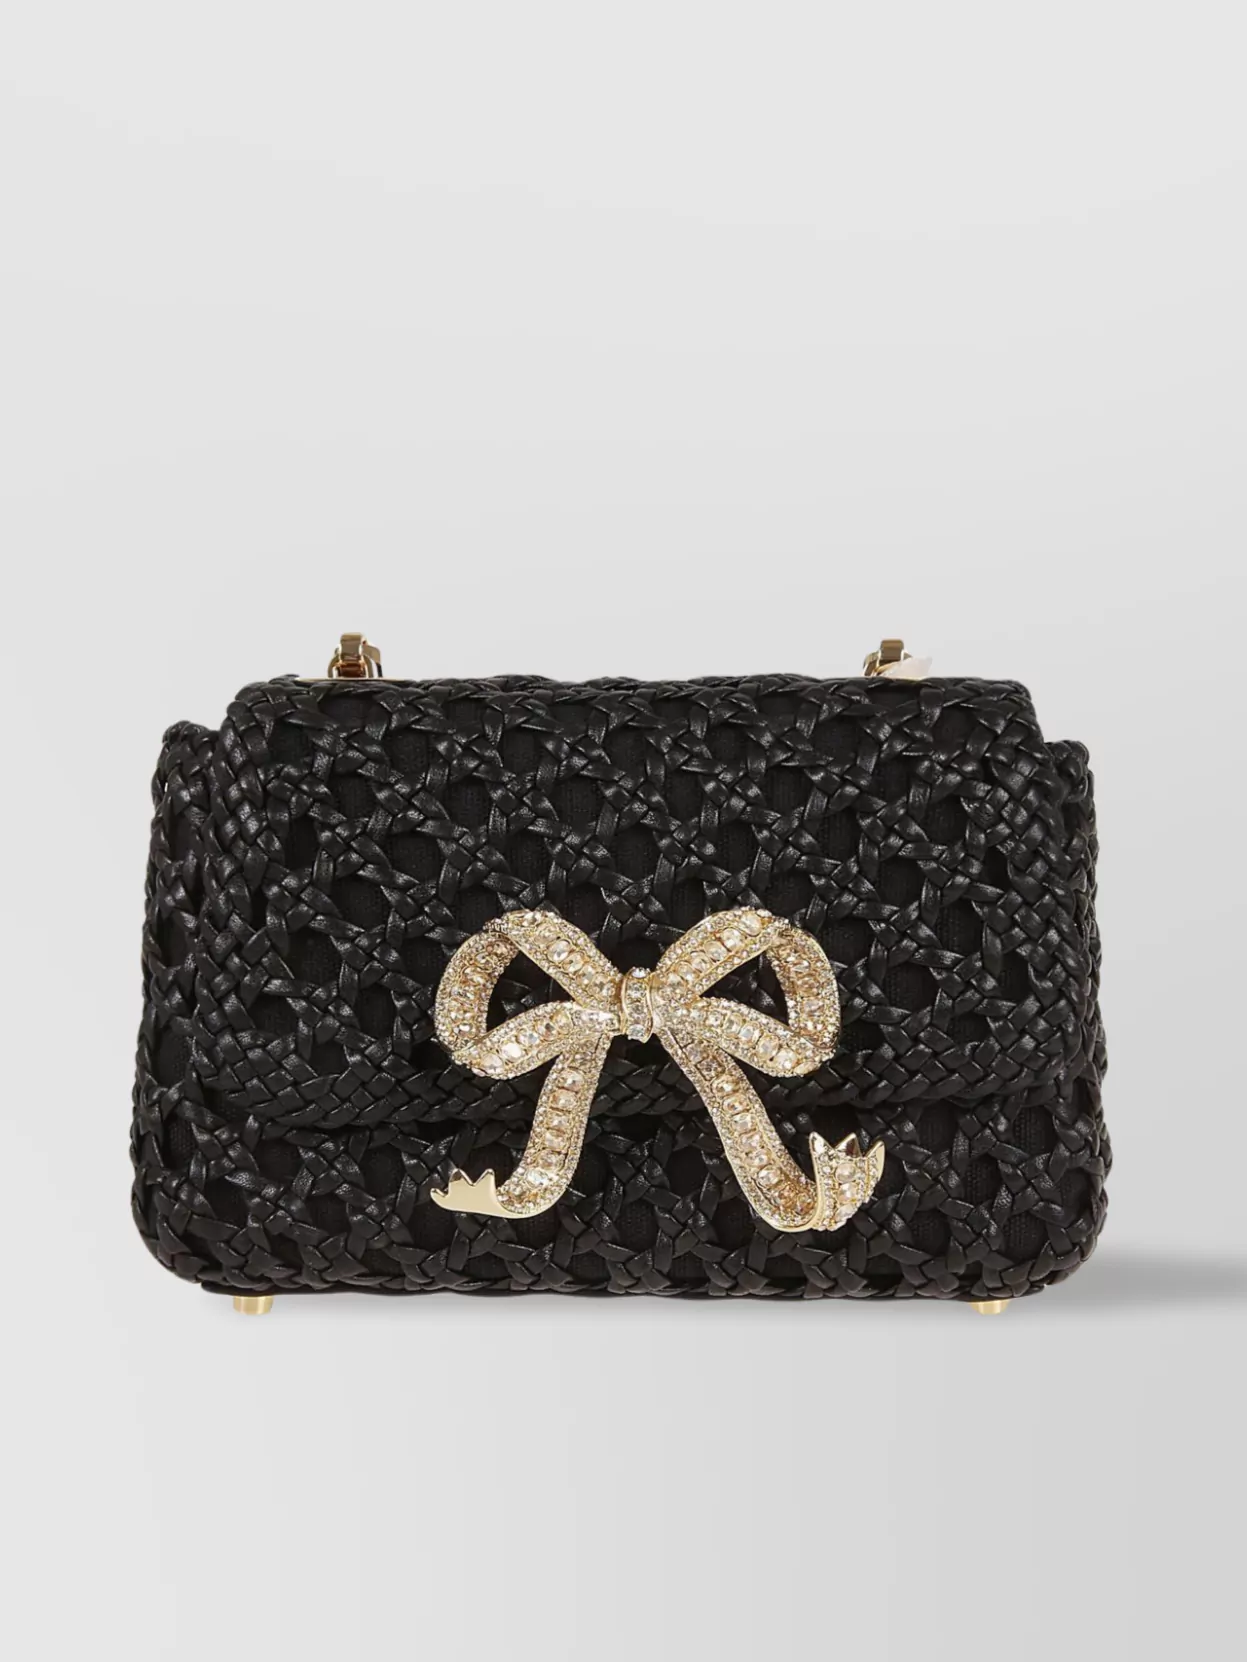 SELF-PORTRAIT WOVEN LEATHER CLUTCH WITH GLITTER BOW DETAIL